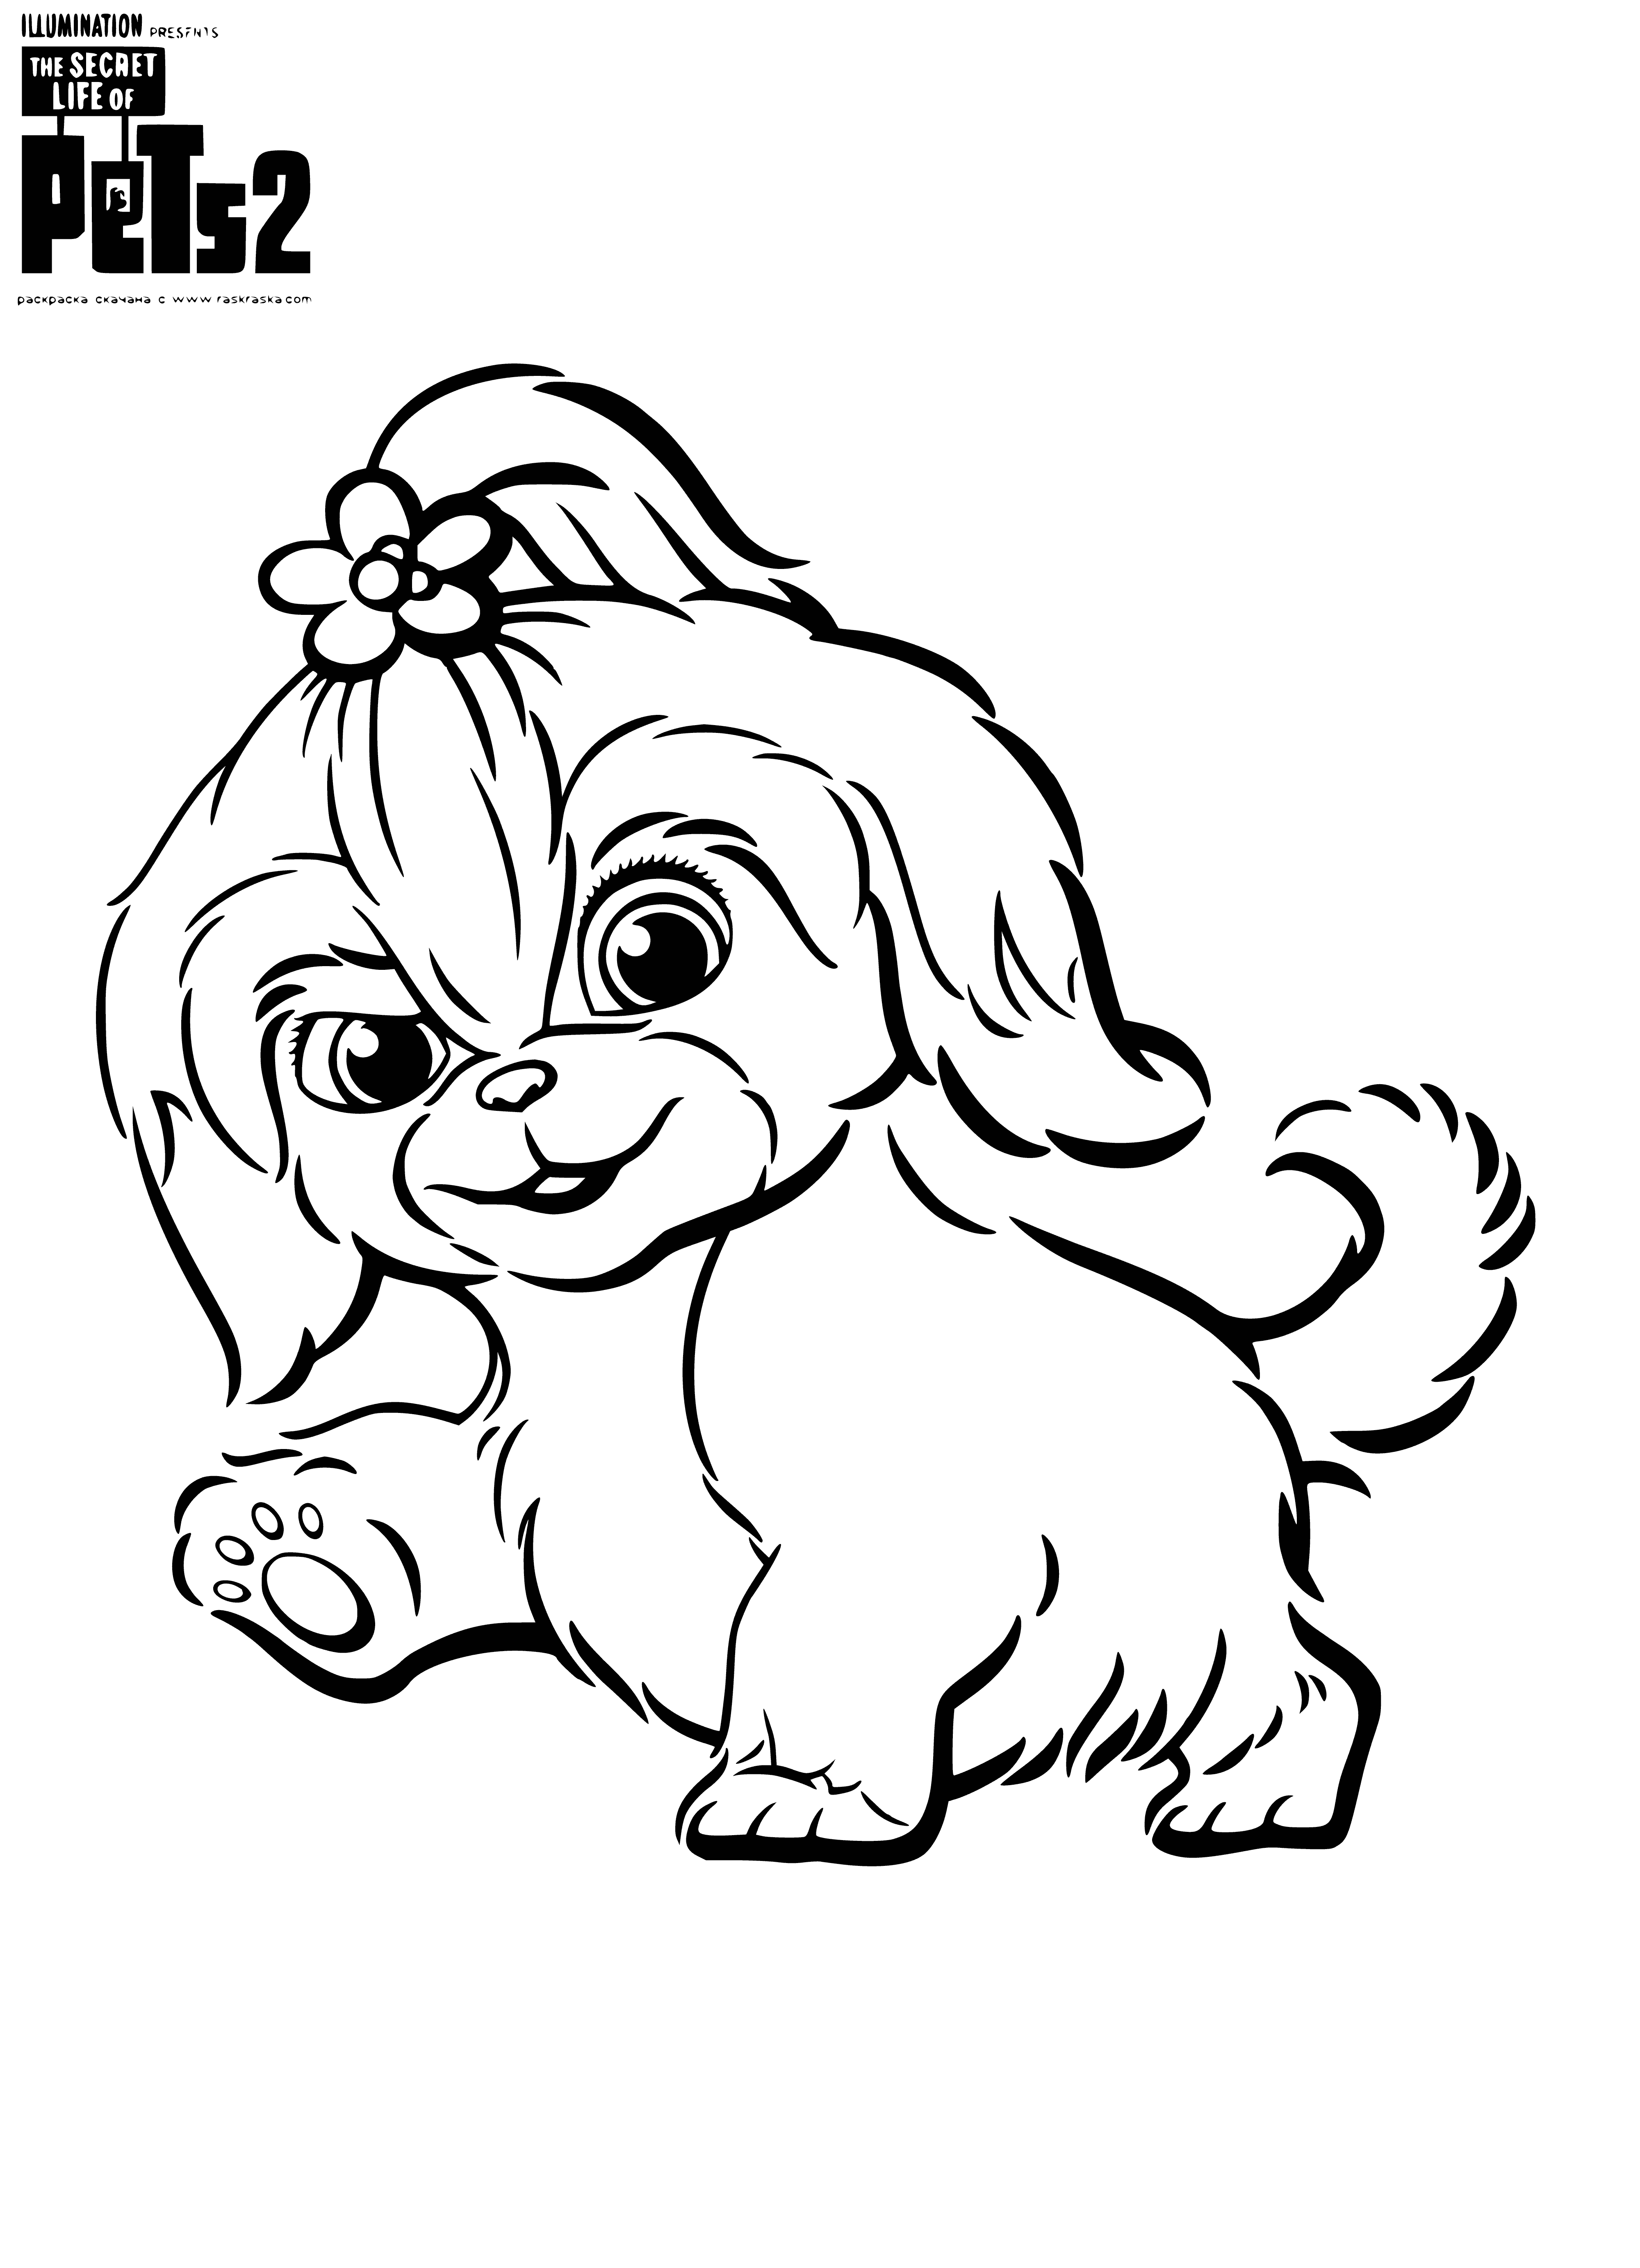 coloring page: Small white dog with black spots relaxes on large green leaves with tongue lolling out, eyes closed.